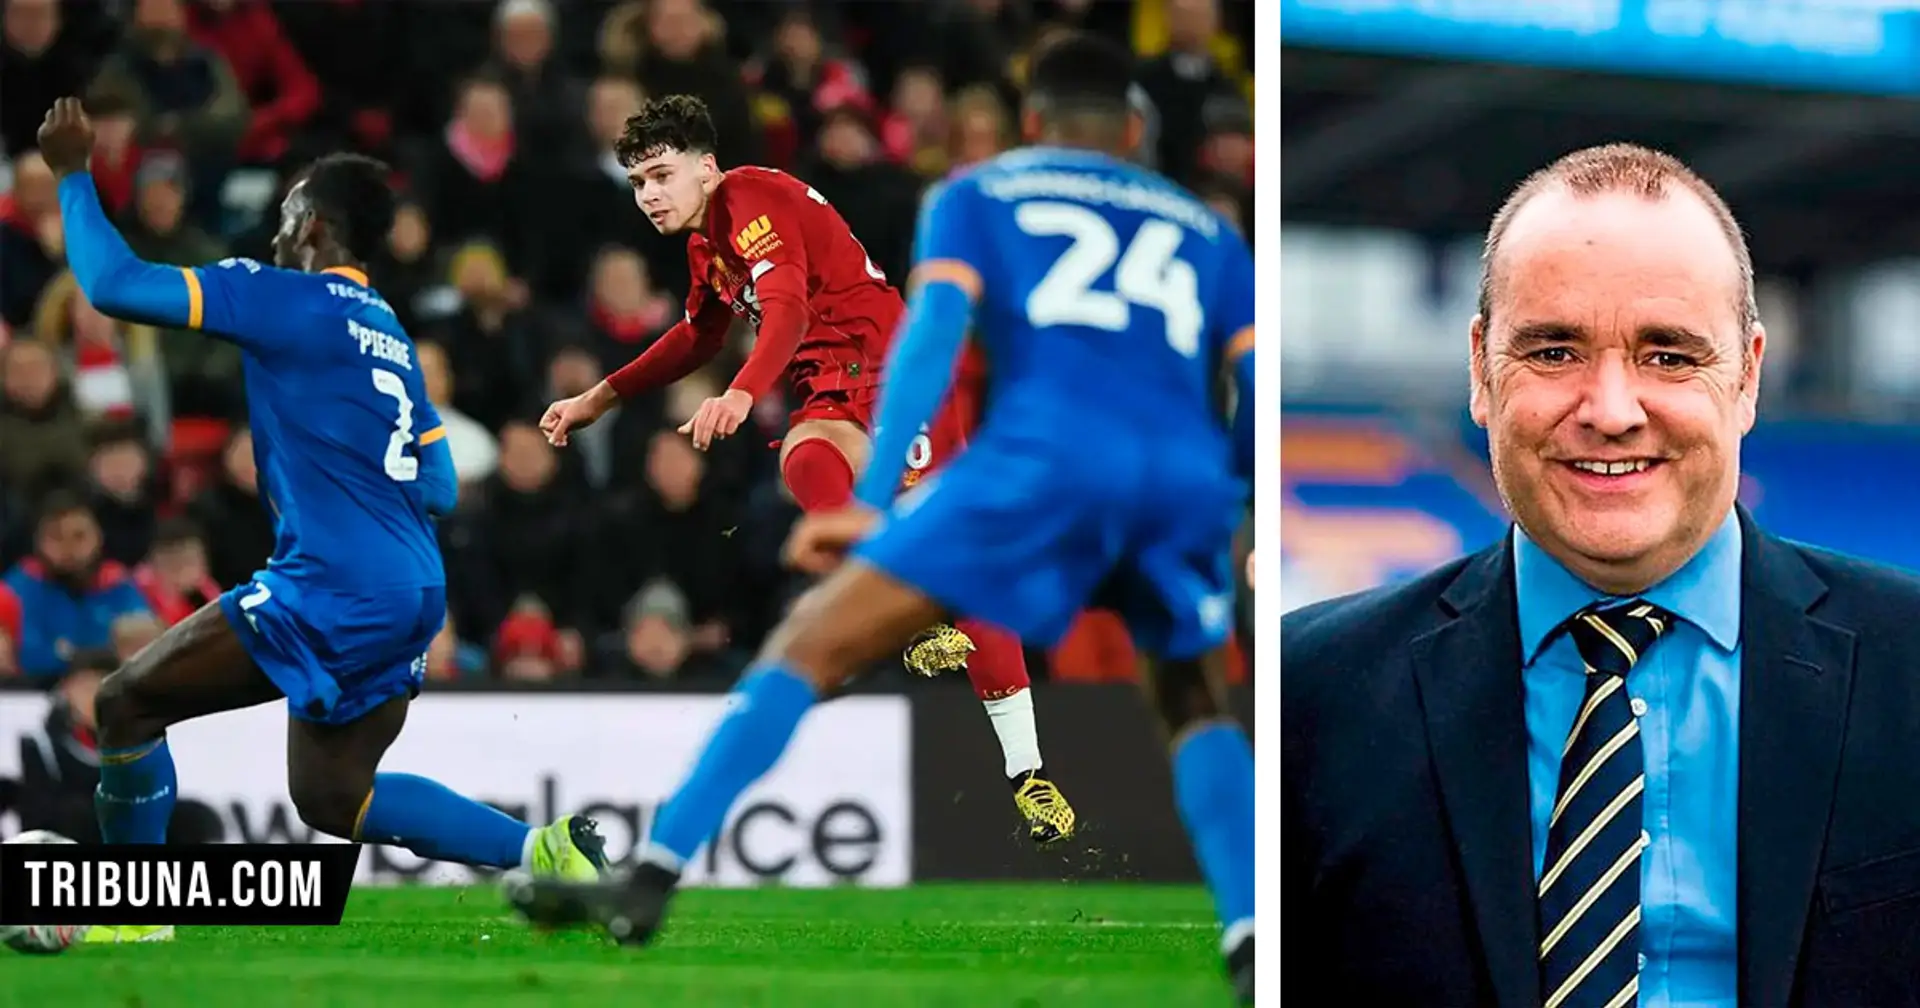 FA dismiss Shrewsbury case against LFC: their CEO accuses Klopp of 'ruining' FA Cup replay and affecting TV revenue